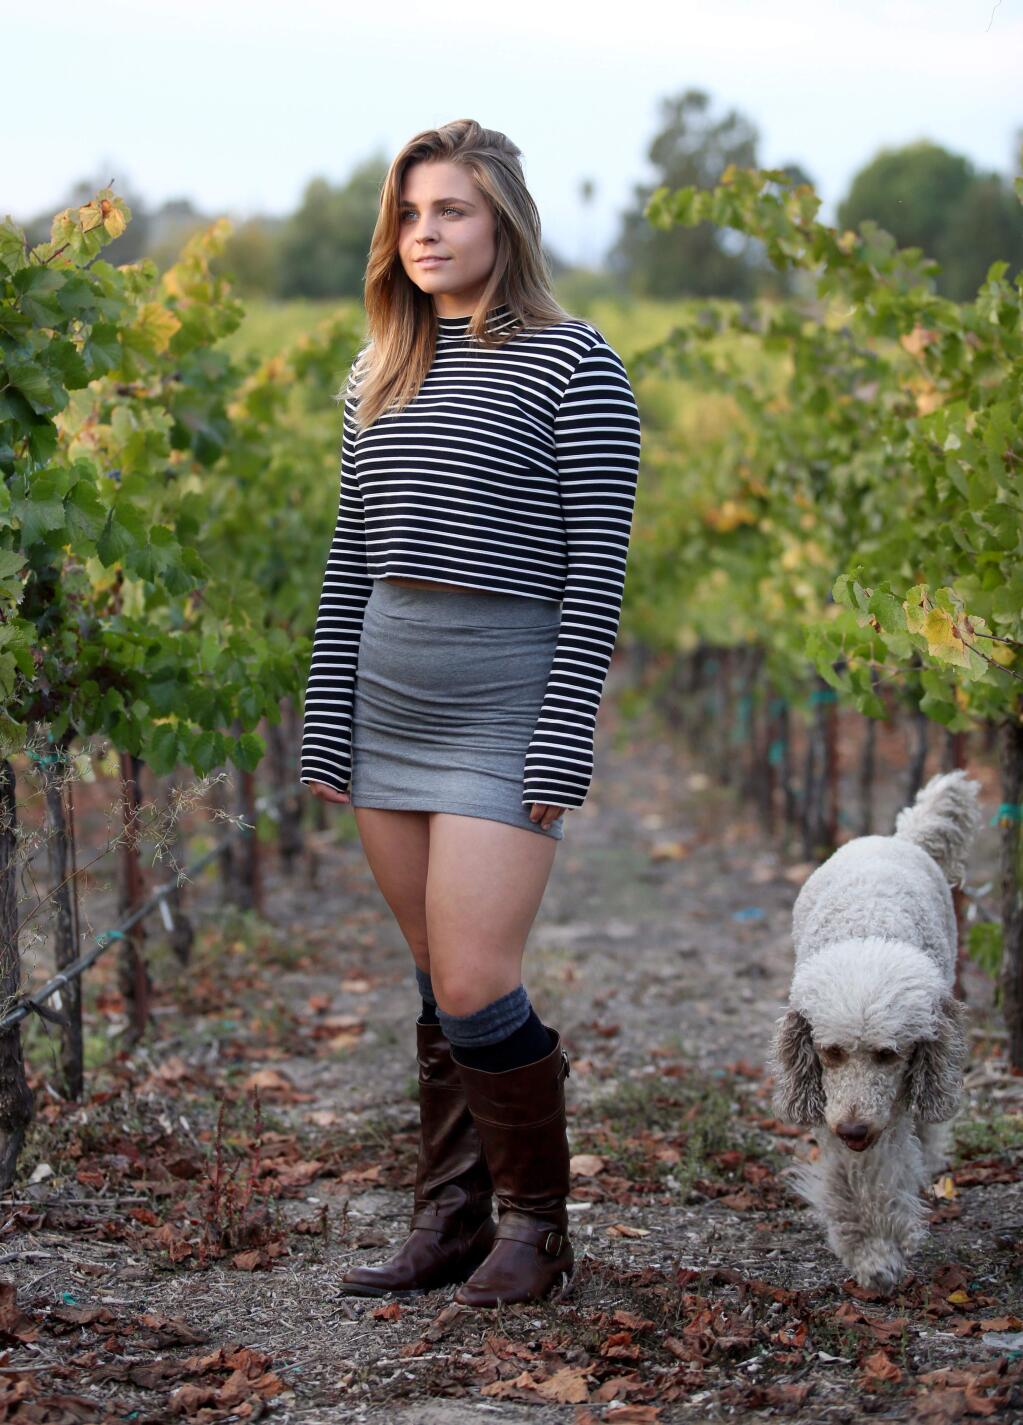 Sunce Franicevic, 16, a senior at Santa Rosa High School, stands with her dog Sadie in her families winery, Sunce Winery, named after her, Monday, September 29, 2014. (Crista Jeremiason / The Press Democrat)